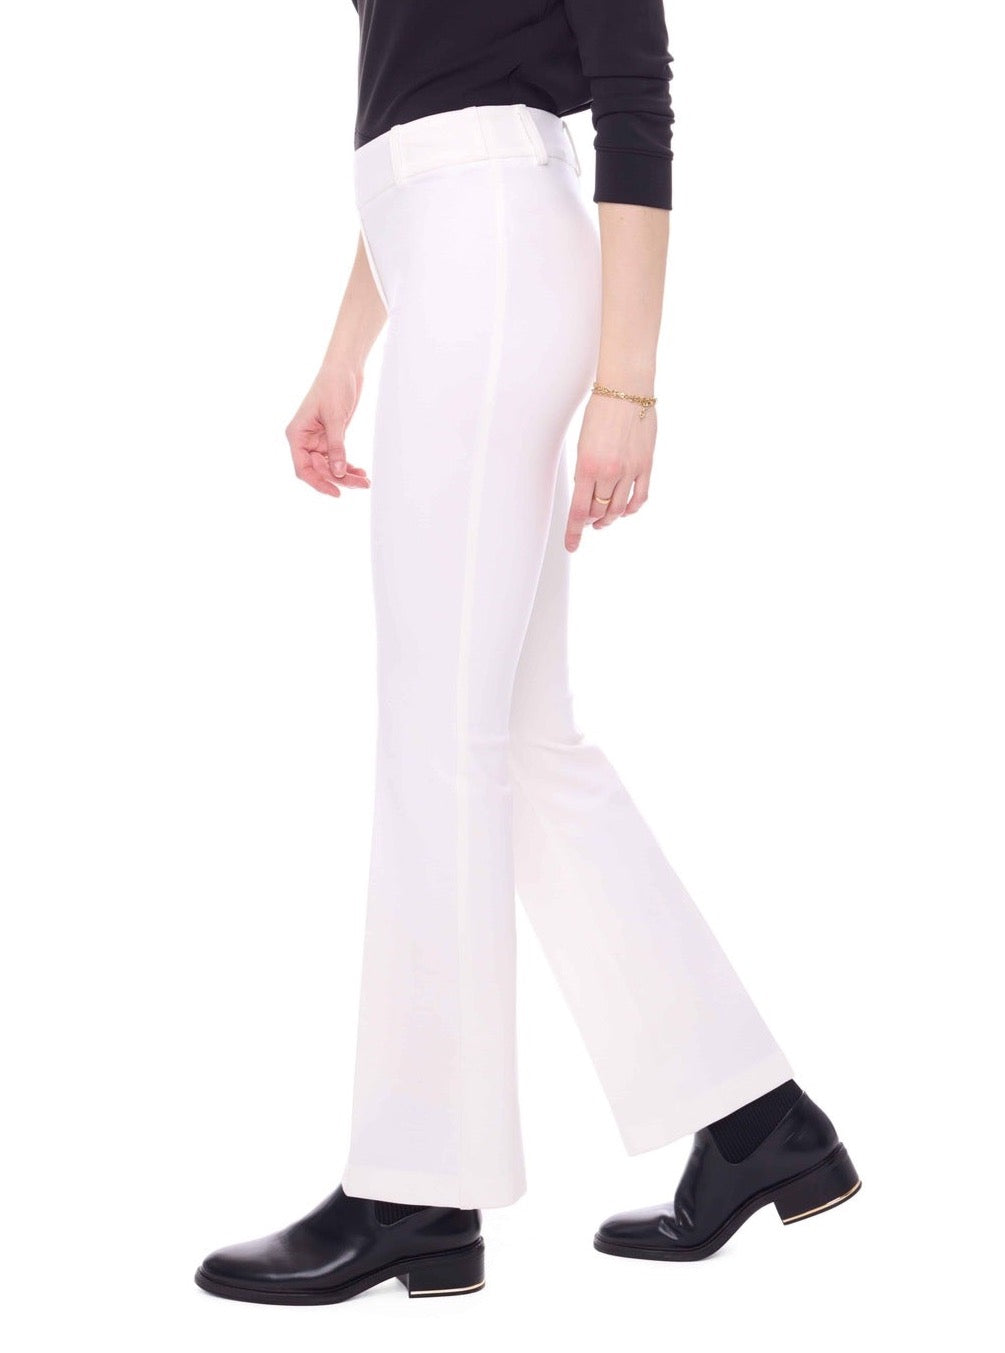 I Love Tyler Madison Axel Ponte Boot Leg Pant in Cloud